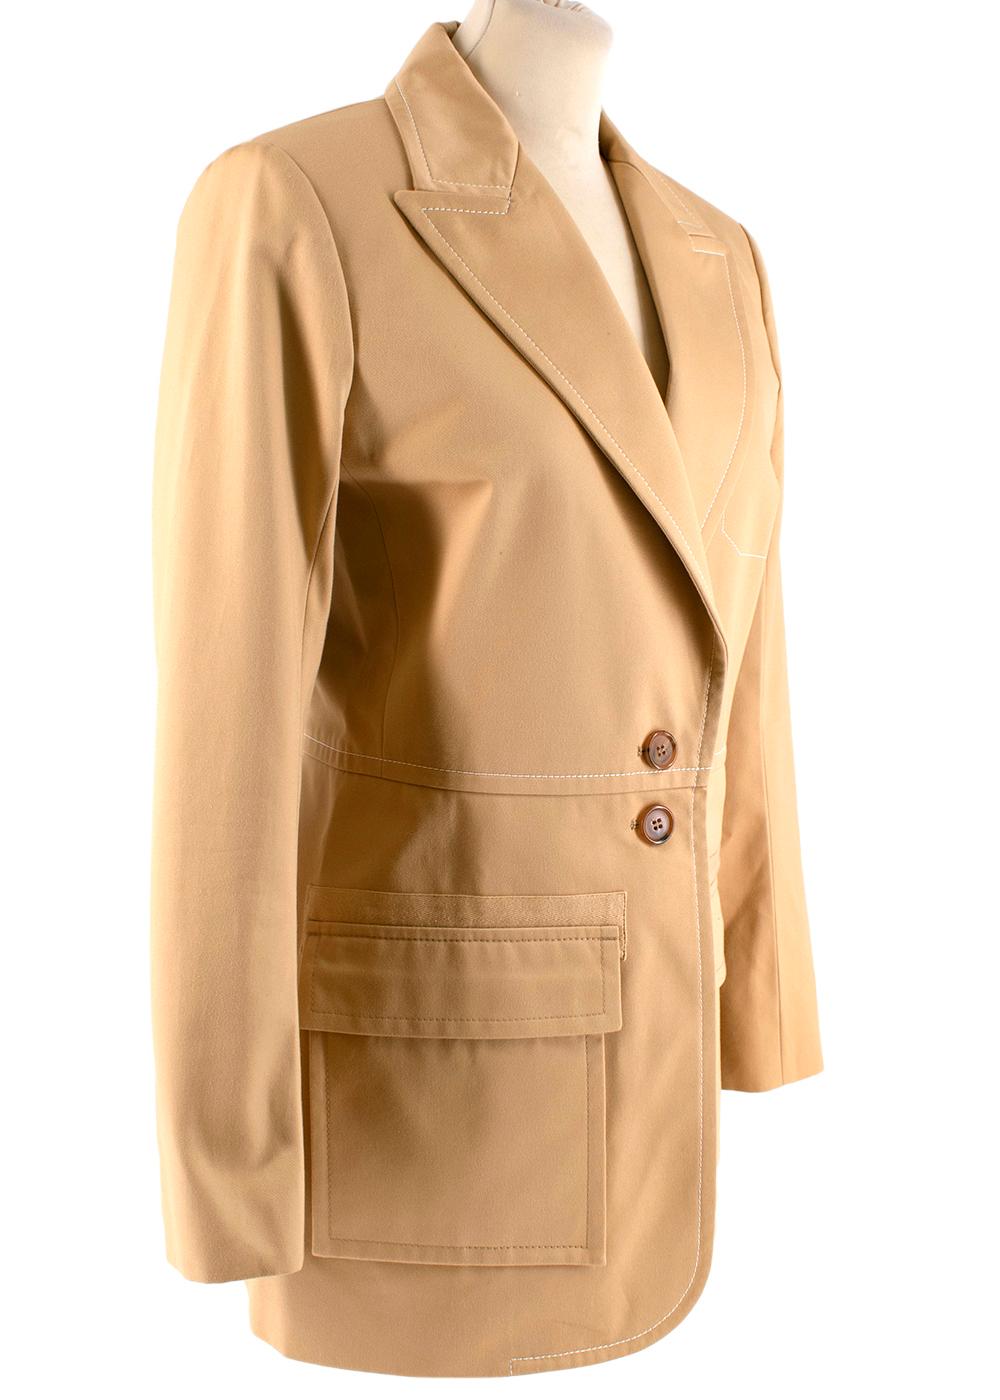 Chloe Quiet Brown Cotton Single Breasted Blazer Jacket 

- Made of soft structured cotton 
- Classic cut 
- Contrasting top stitching 
- Button fastening to the front 
- Gorgeous pale yellow hue 
- Pockets to the front  
- Hardware detail to the